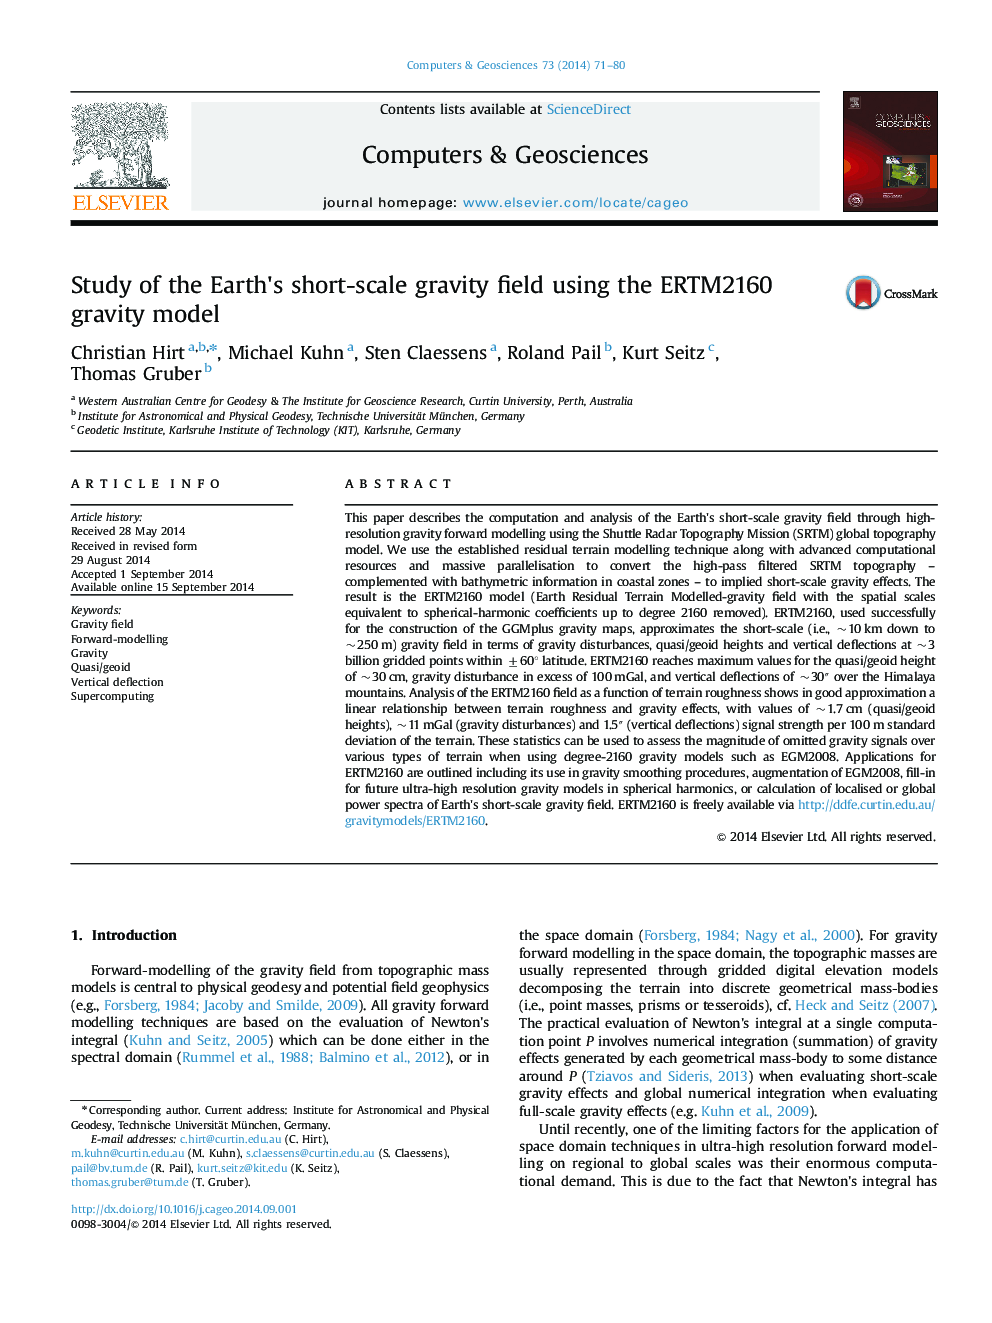 Study of the Earth×³s short-scale gravity field using the ERTM2160 gravity model